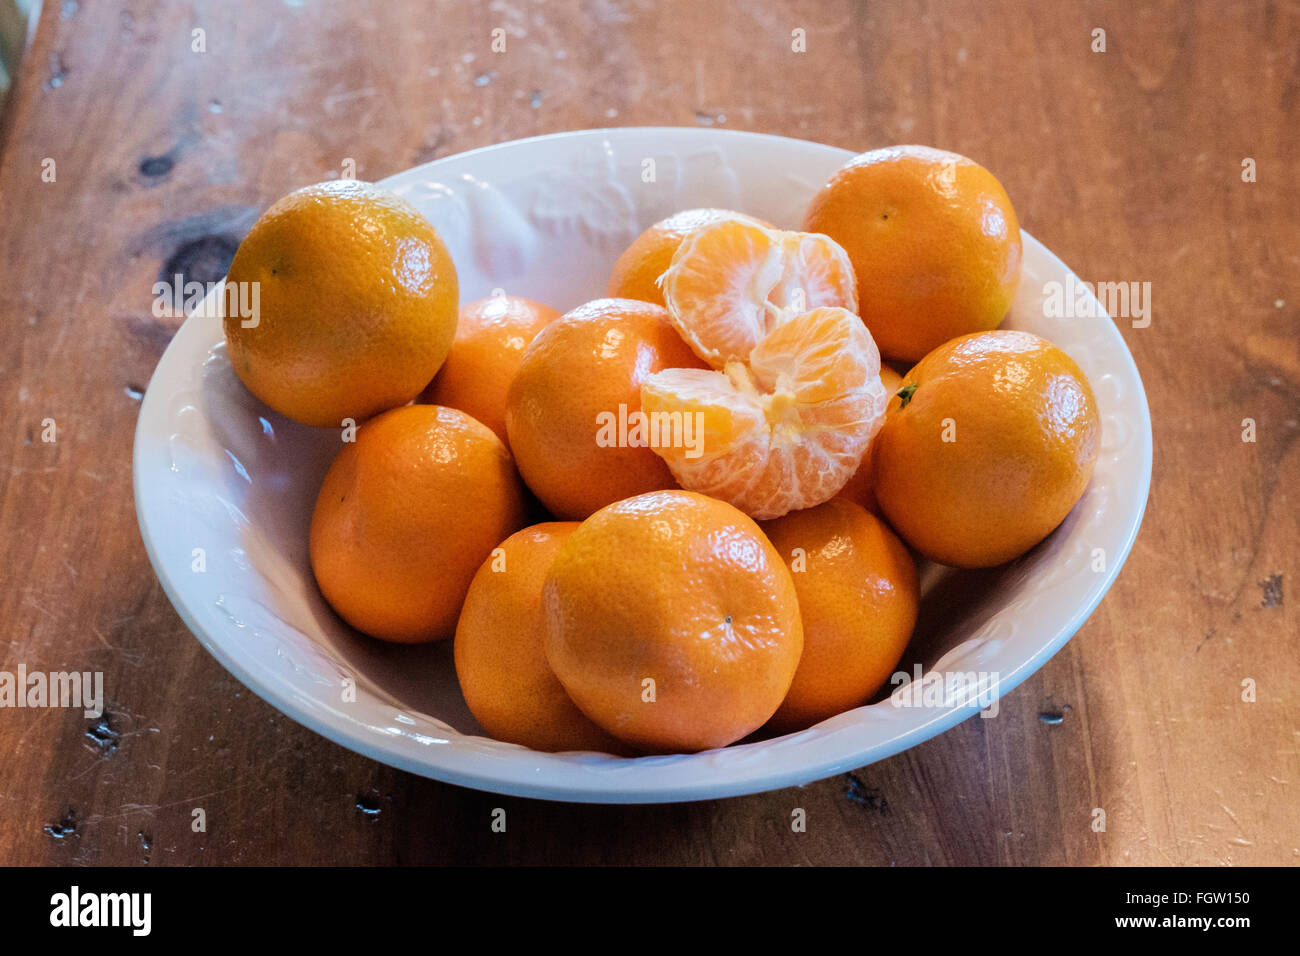 Mandarin oranges, Citrus reticulata, with one peeled, in a white bowl. Stock Photo